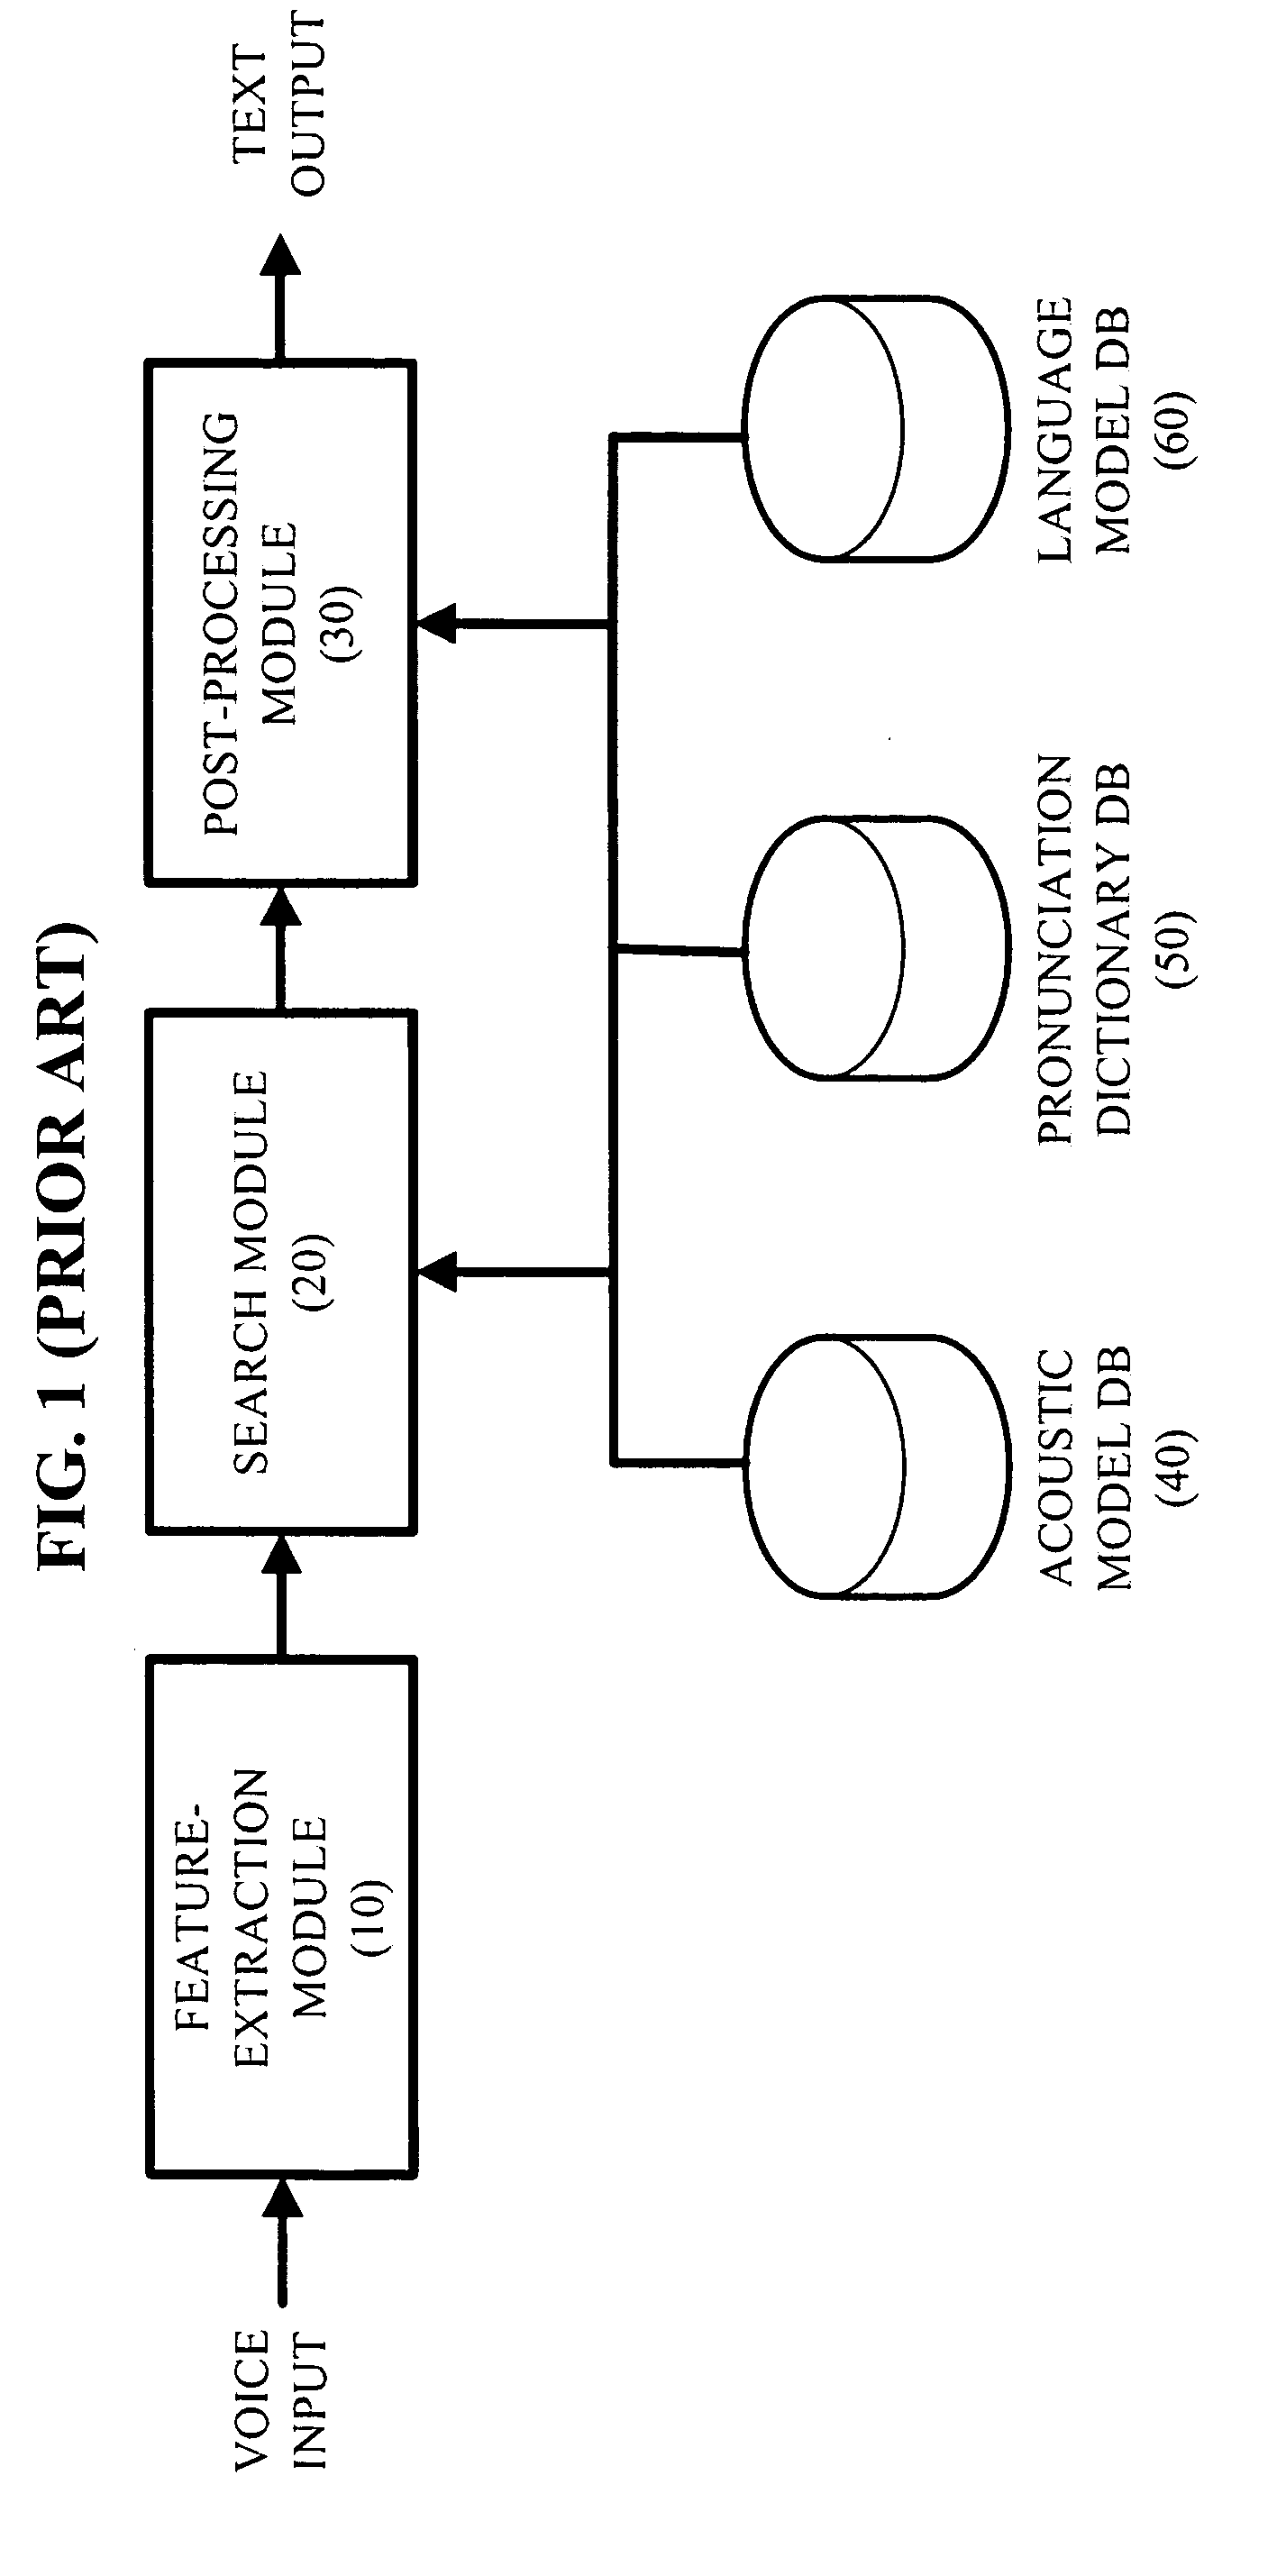 Apparatus, method, and medium for dialogue speech recognition using topic domain detection